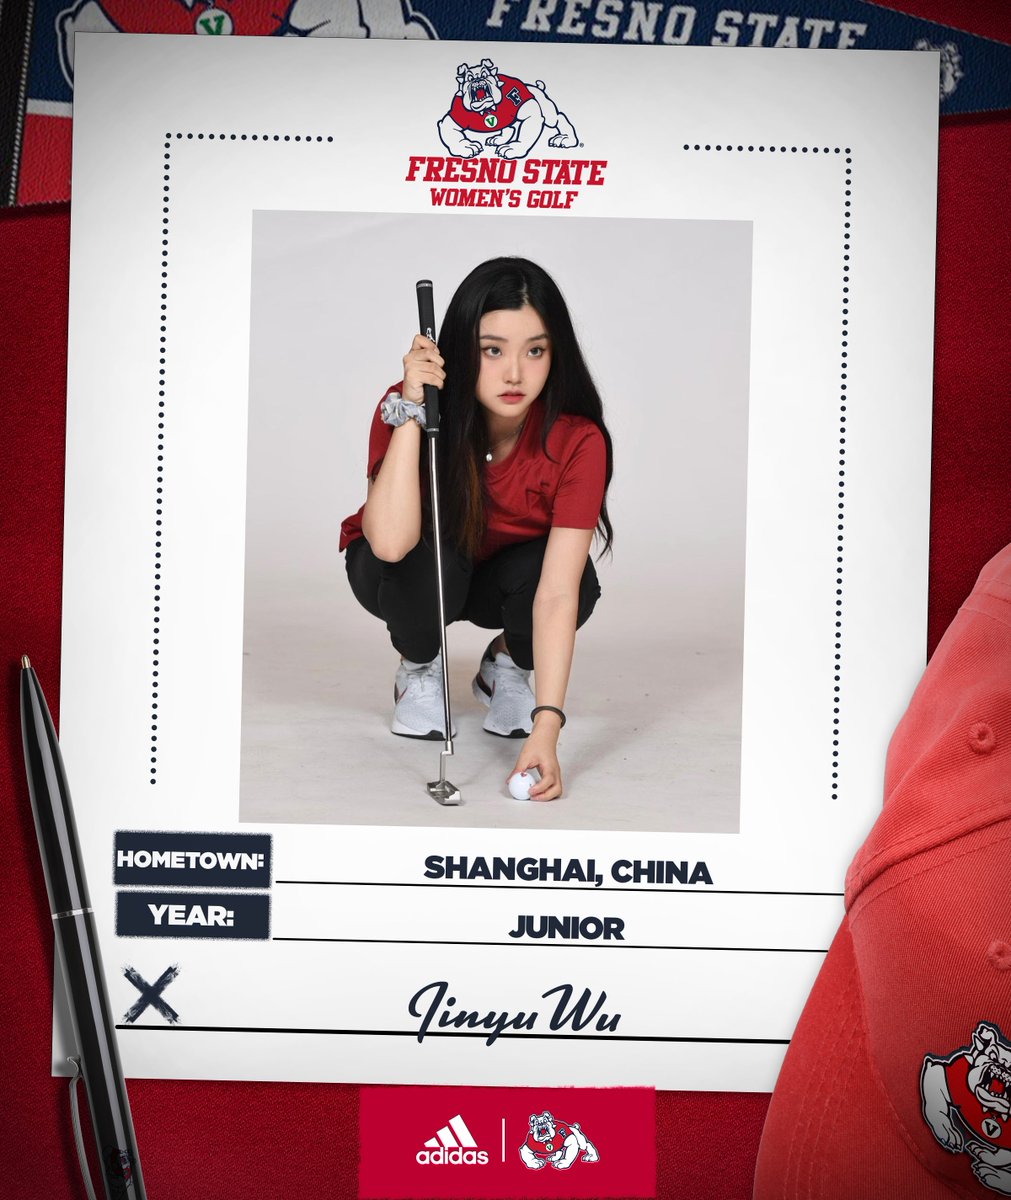 𝐒𝐈𝐆𝐍𝐄𝐃⛳️

Welcome to the Valley, Jinyu‼️

#GoDogs ✖️ #Elevate